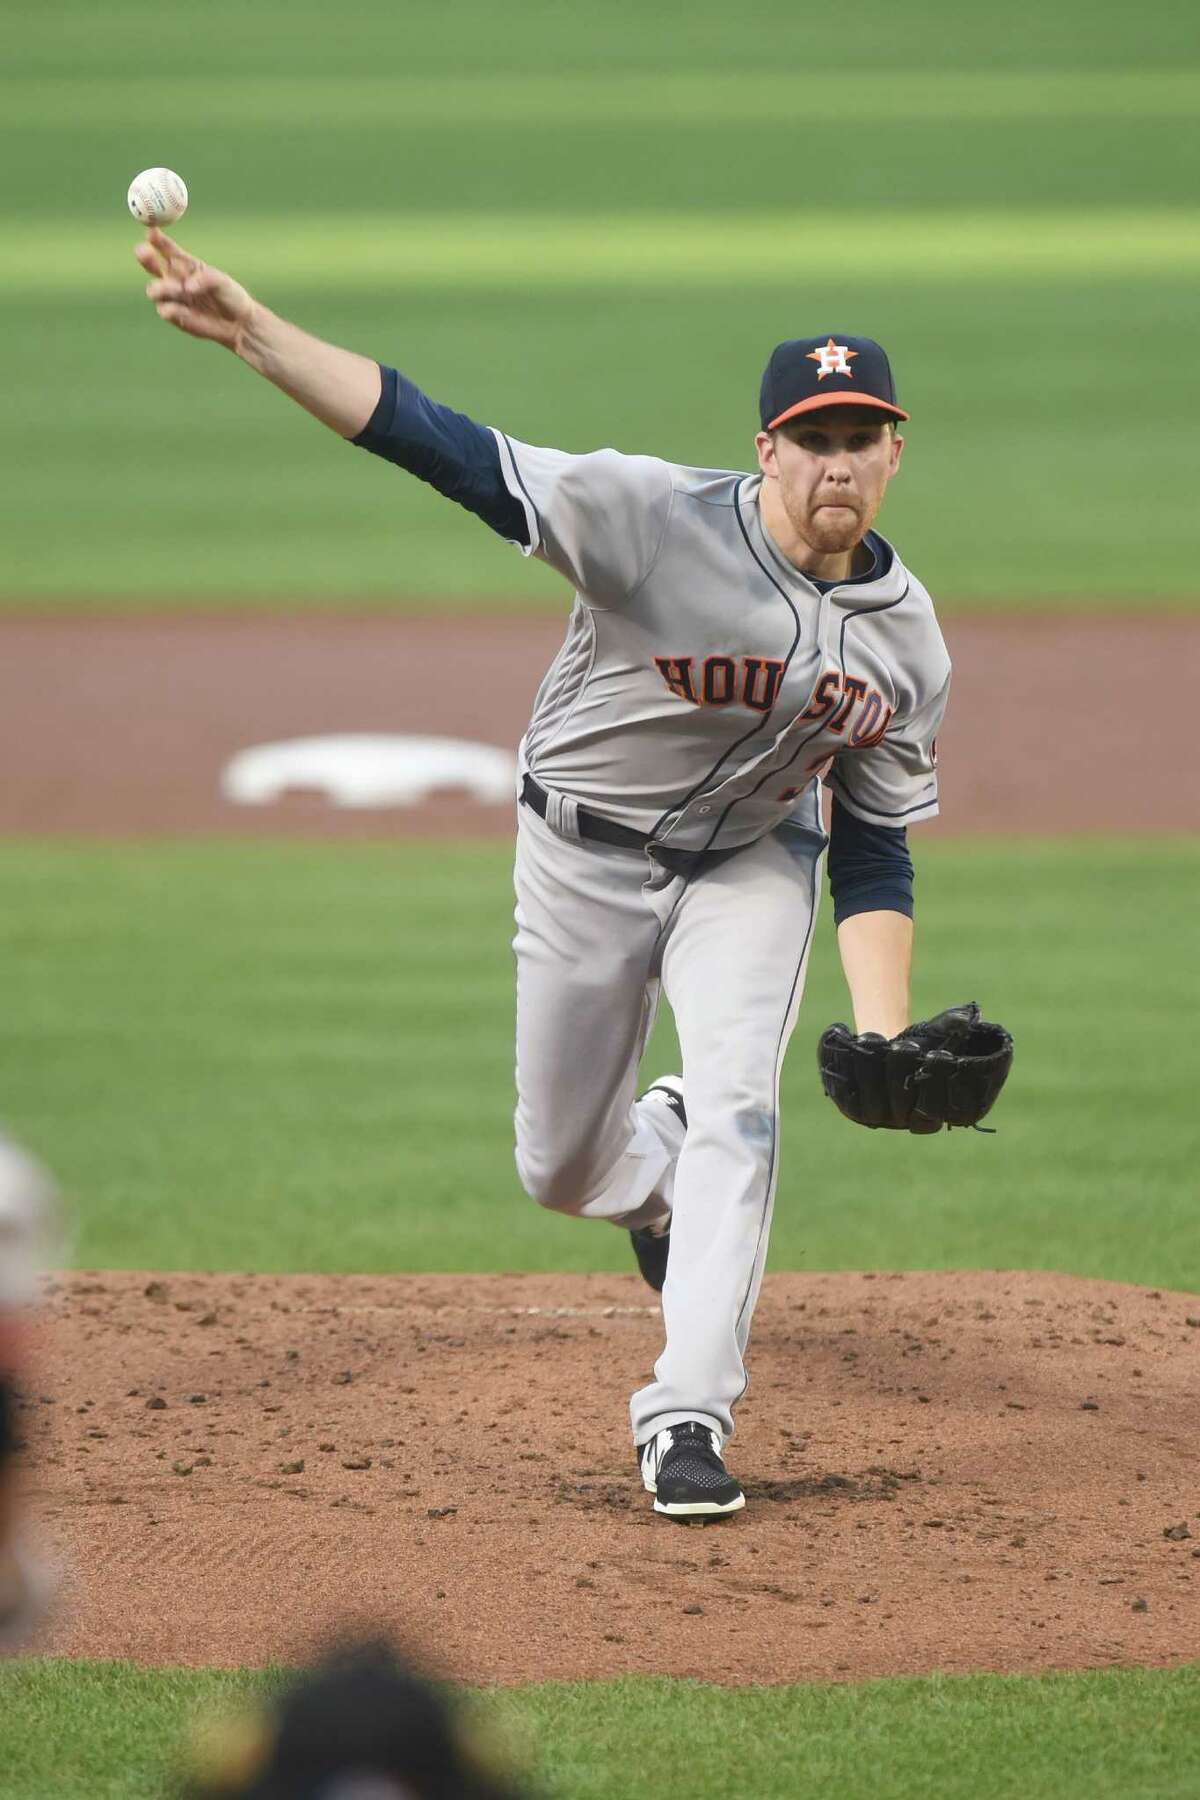 It was a rough night for Astros starter Collin McHugh, who gave up four home runs before getting an out in the first inning. He lasted three innings and allowed nine hits and seven runs.